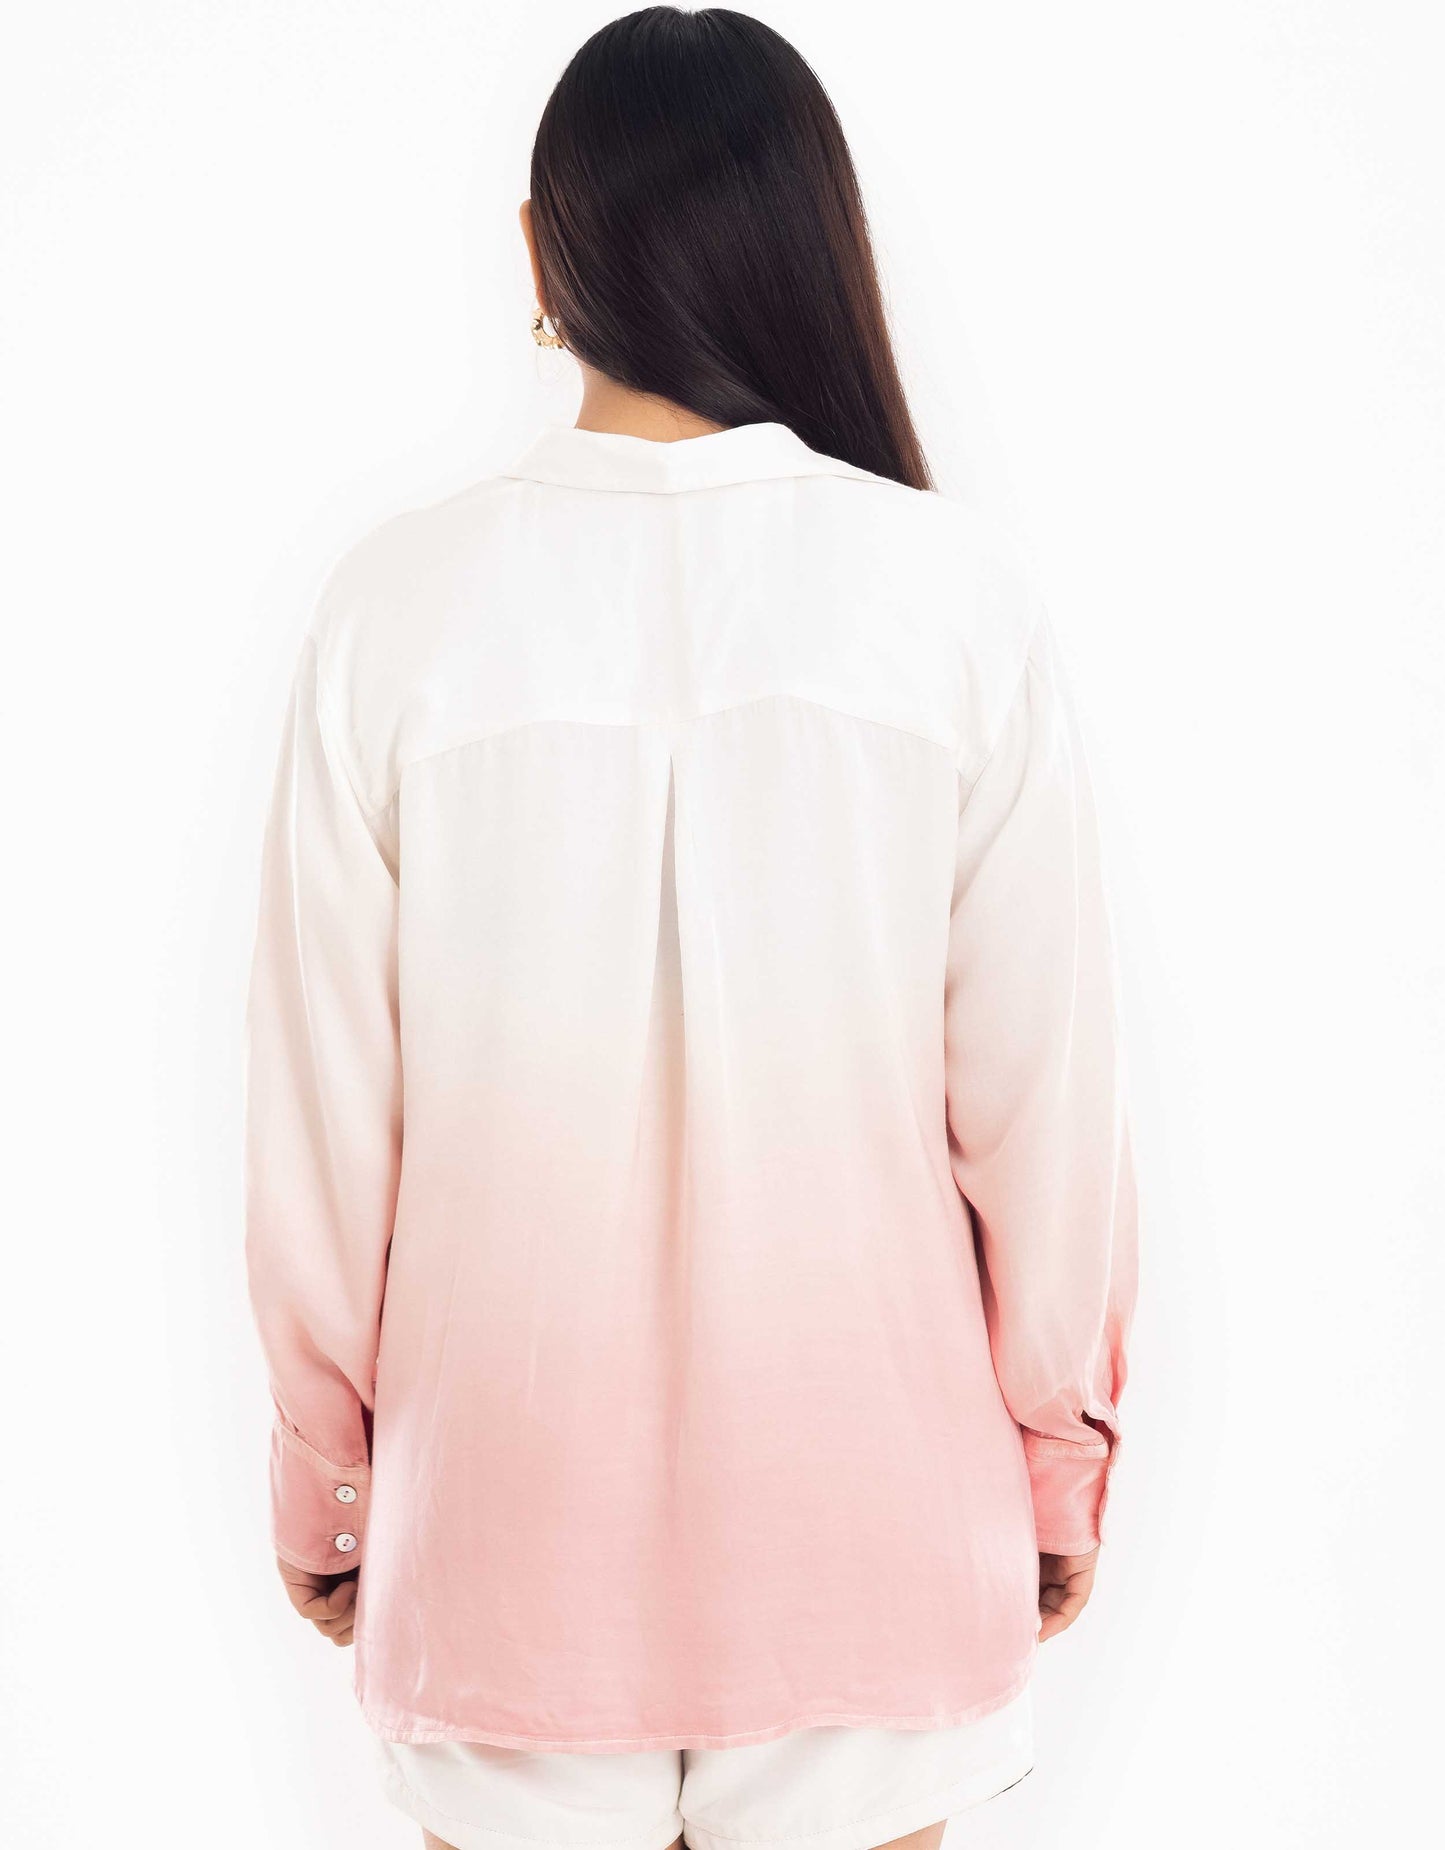 Back view display of Hueloom's Cosmopolitan capsule with oversized shirt, bandeau top and shorts in rose-gold.